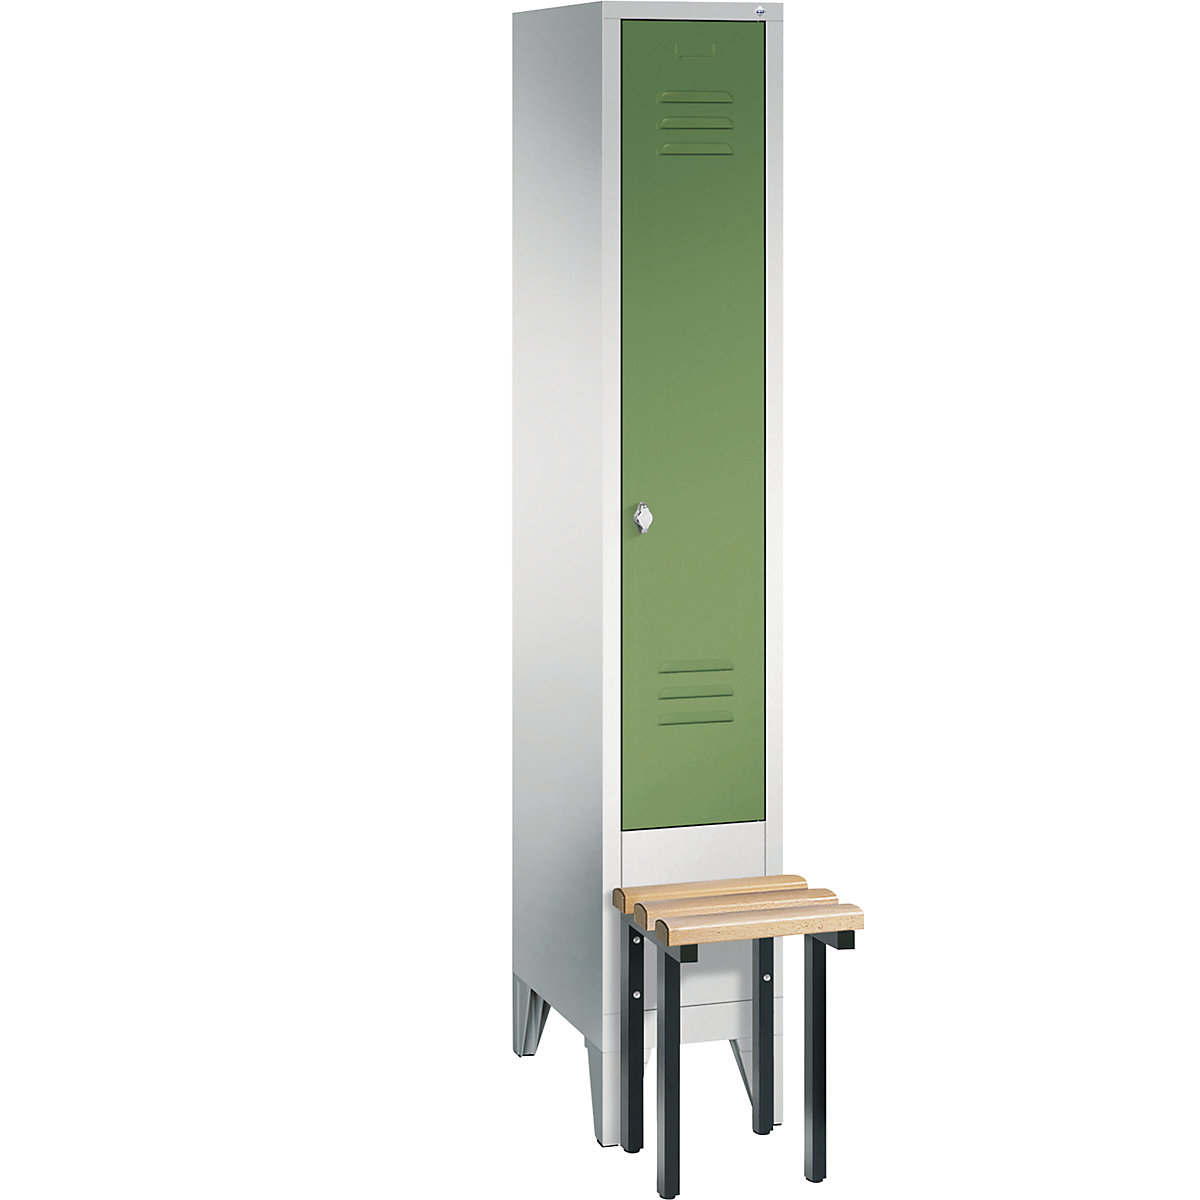 CLASSIC cloakroom locker with bench mounted in front – C+P, 1 compartment, compartment width 300 mm, light grey / reseda green-3